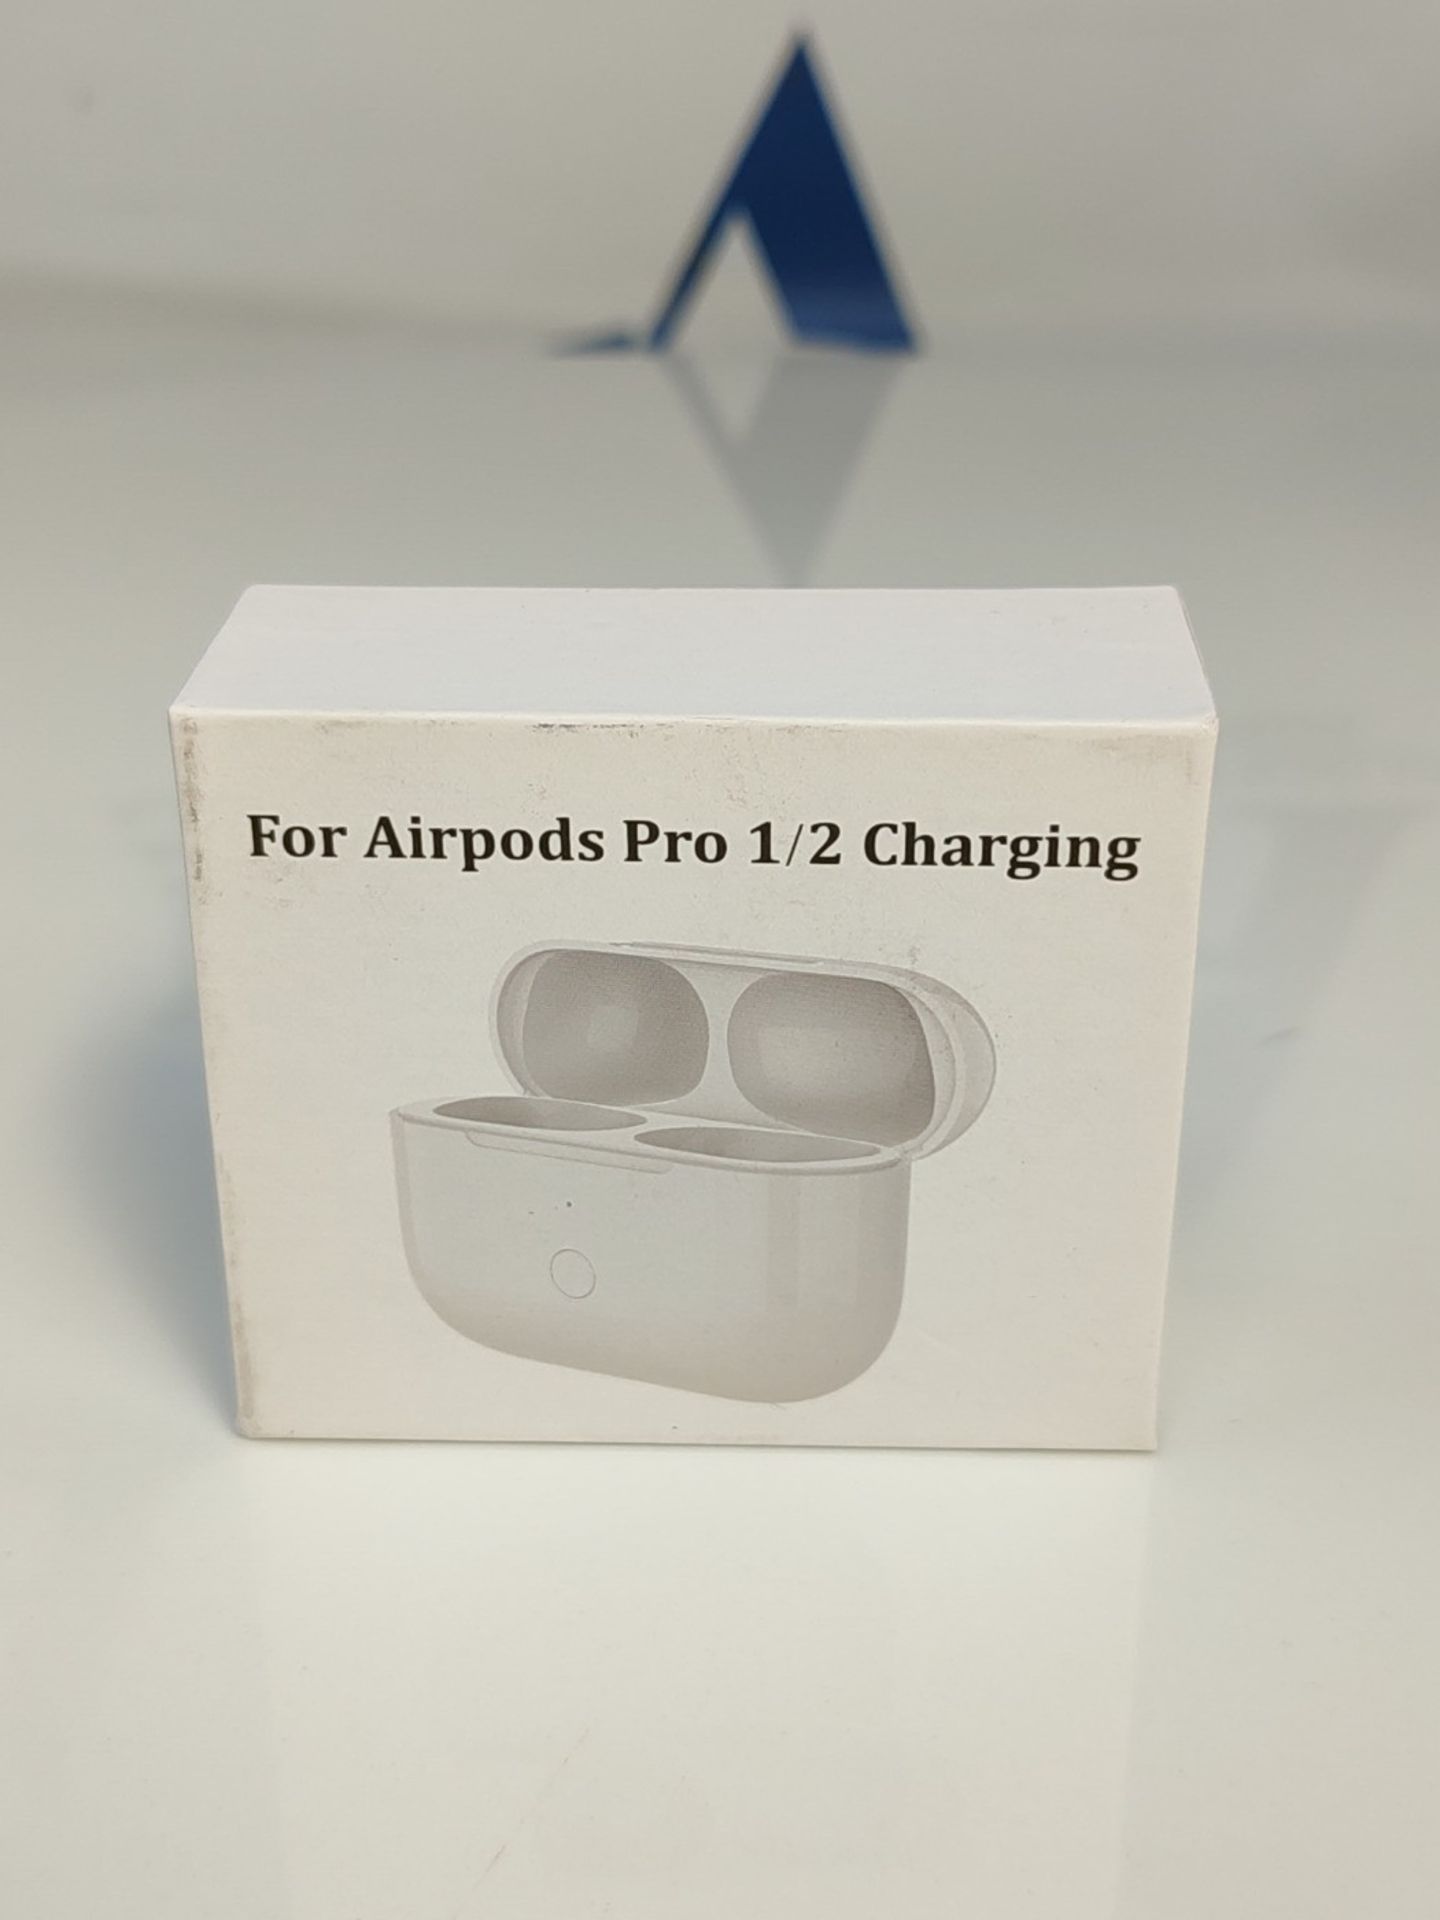 Wireless Charging Case for AirPods Pro 1 and AirPods Pro 2, Replacement Charging Case - Image 2 of 3